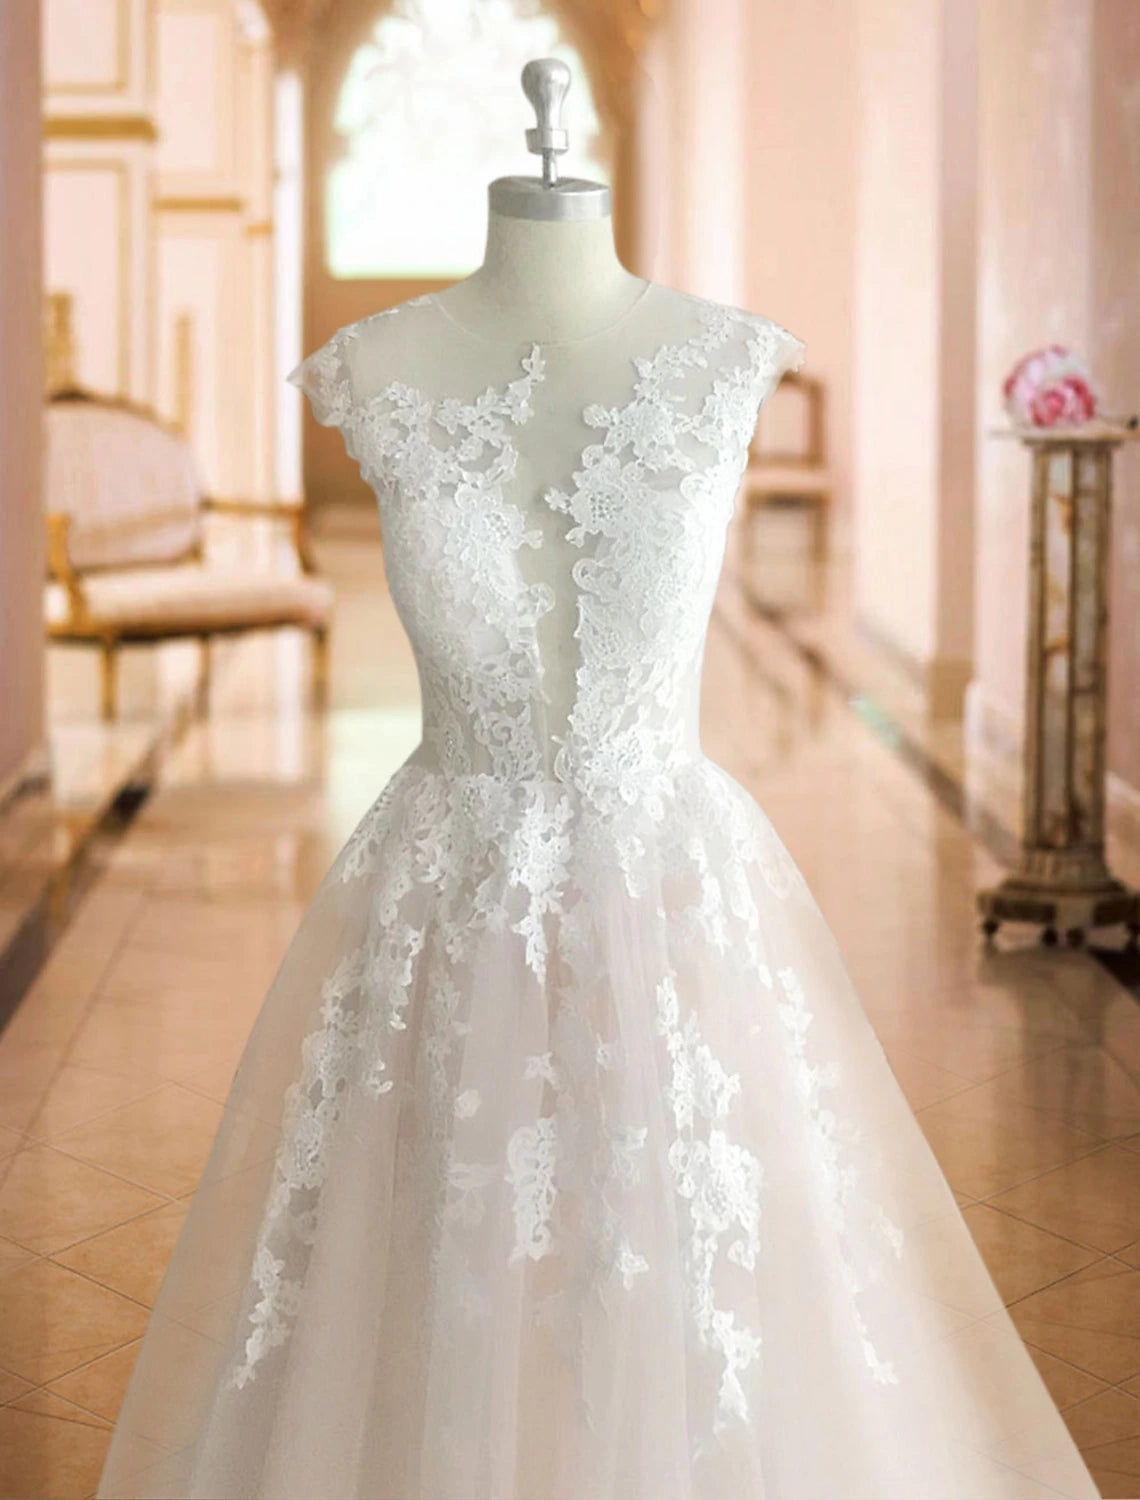 Formal Wedding Dresses Ball Gown Illusion Neck Cap Sleeve Court Train Lace Bridal Gowns With Buttons Appliques 2023 Summer Wedding Party, Women's Clothing